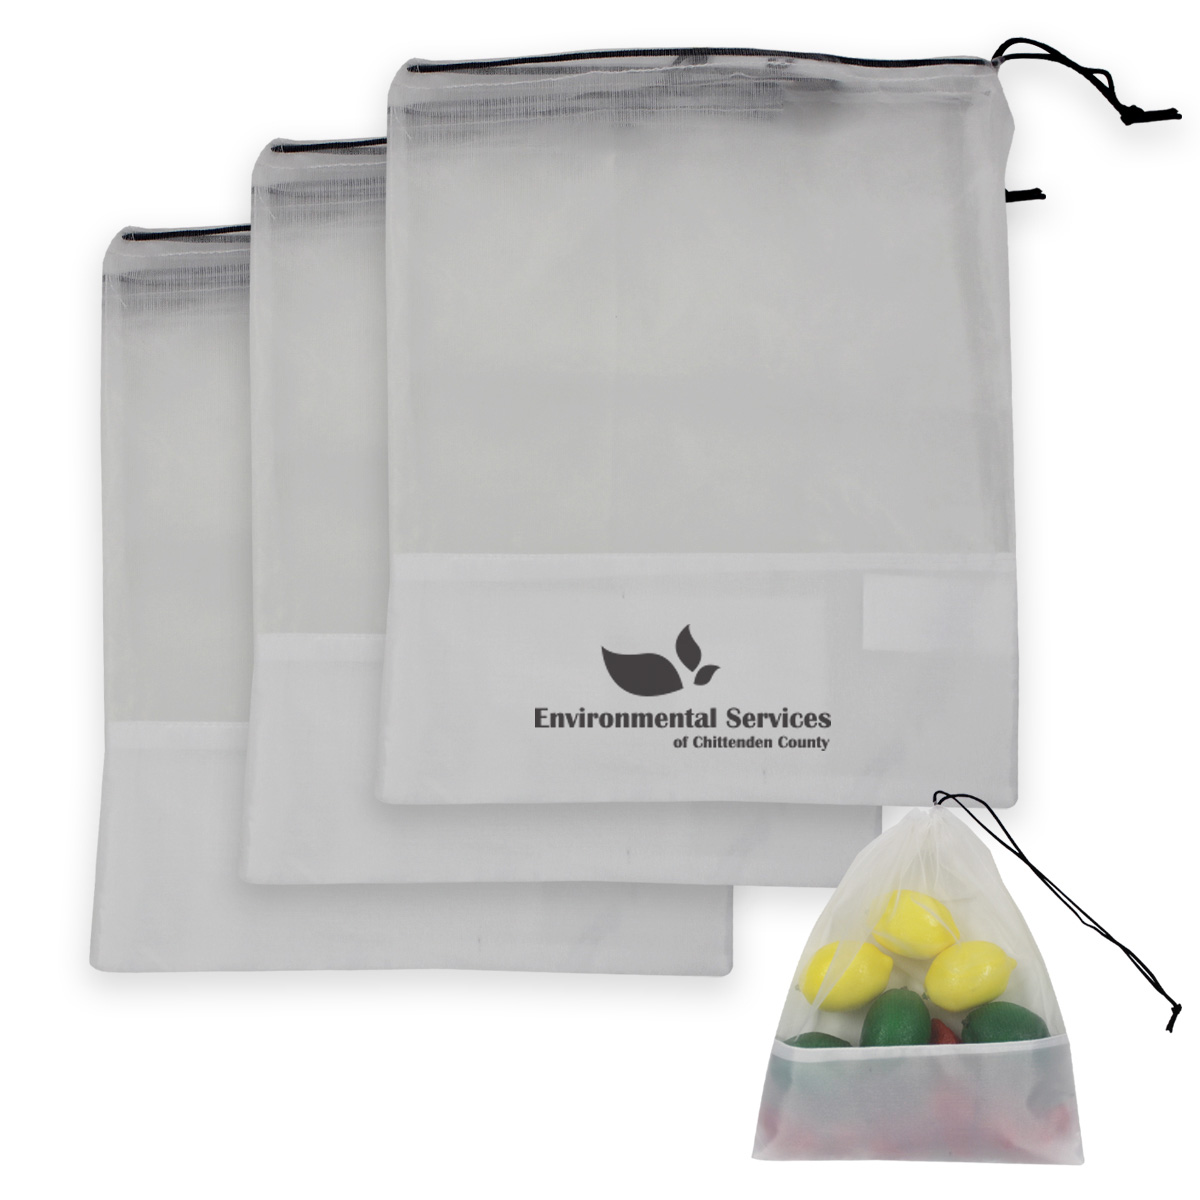 3 PC. MARKET MESH Produce Bag SET WITH 100% RPET MATERIAL